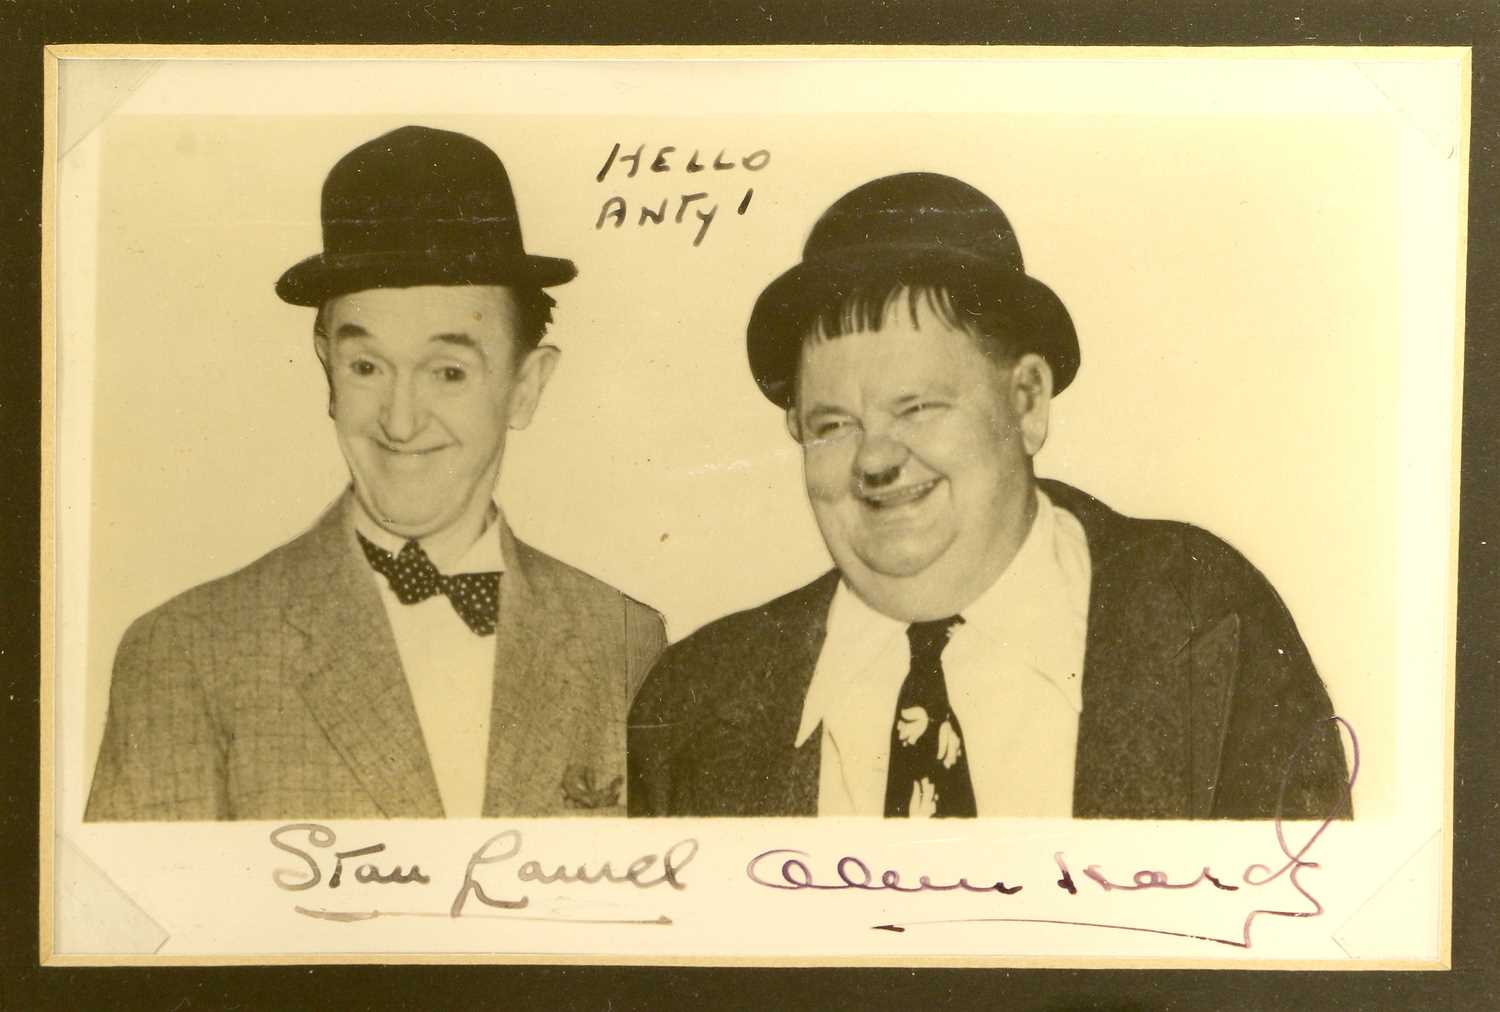 Stan Laurel & Oliver Hardy Autographed Photograph - Image 2 of 2